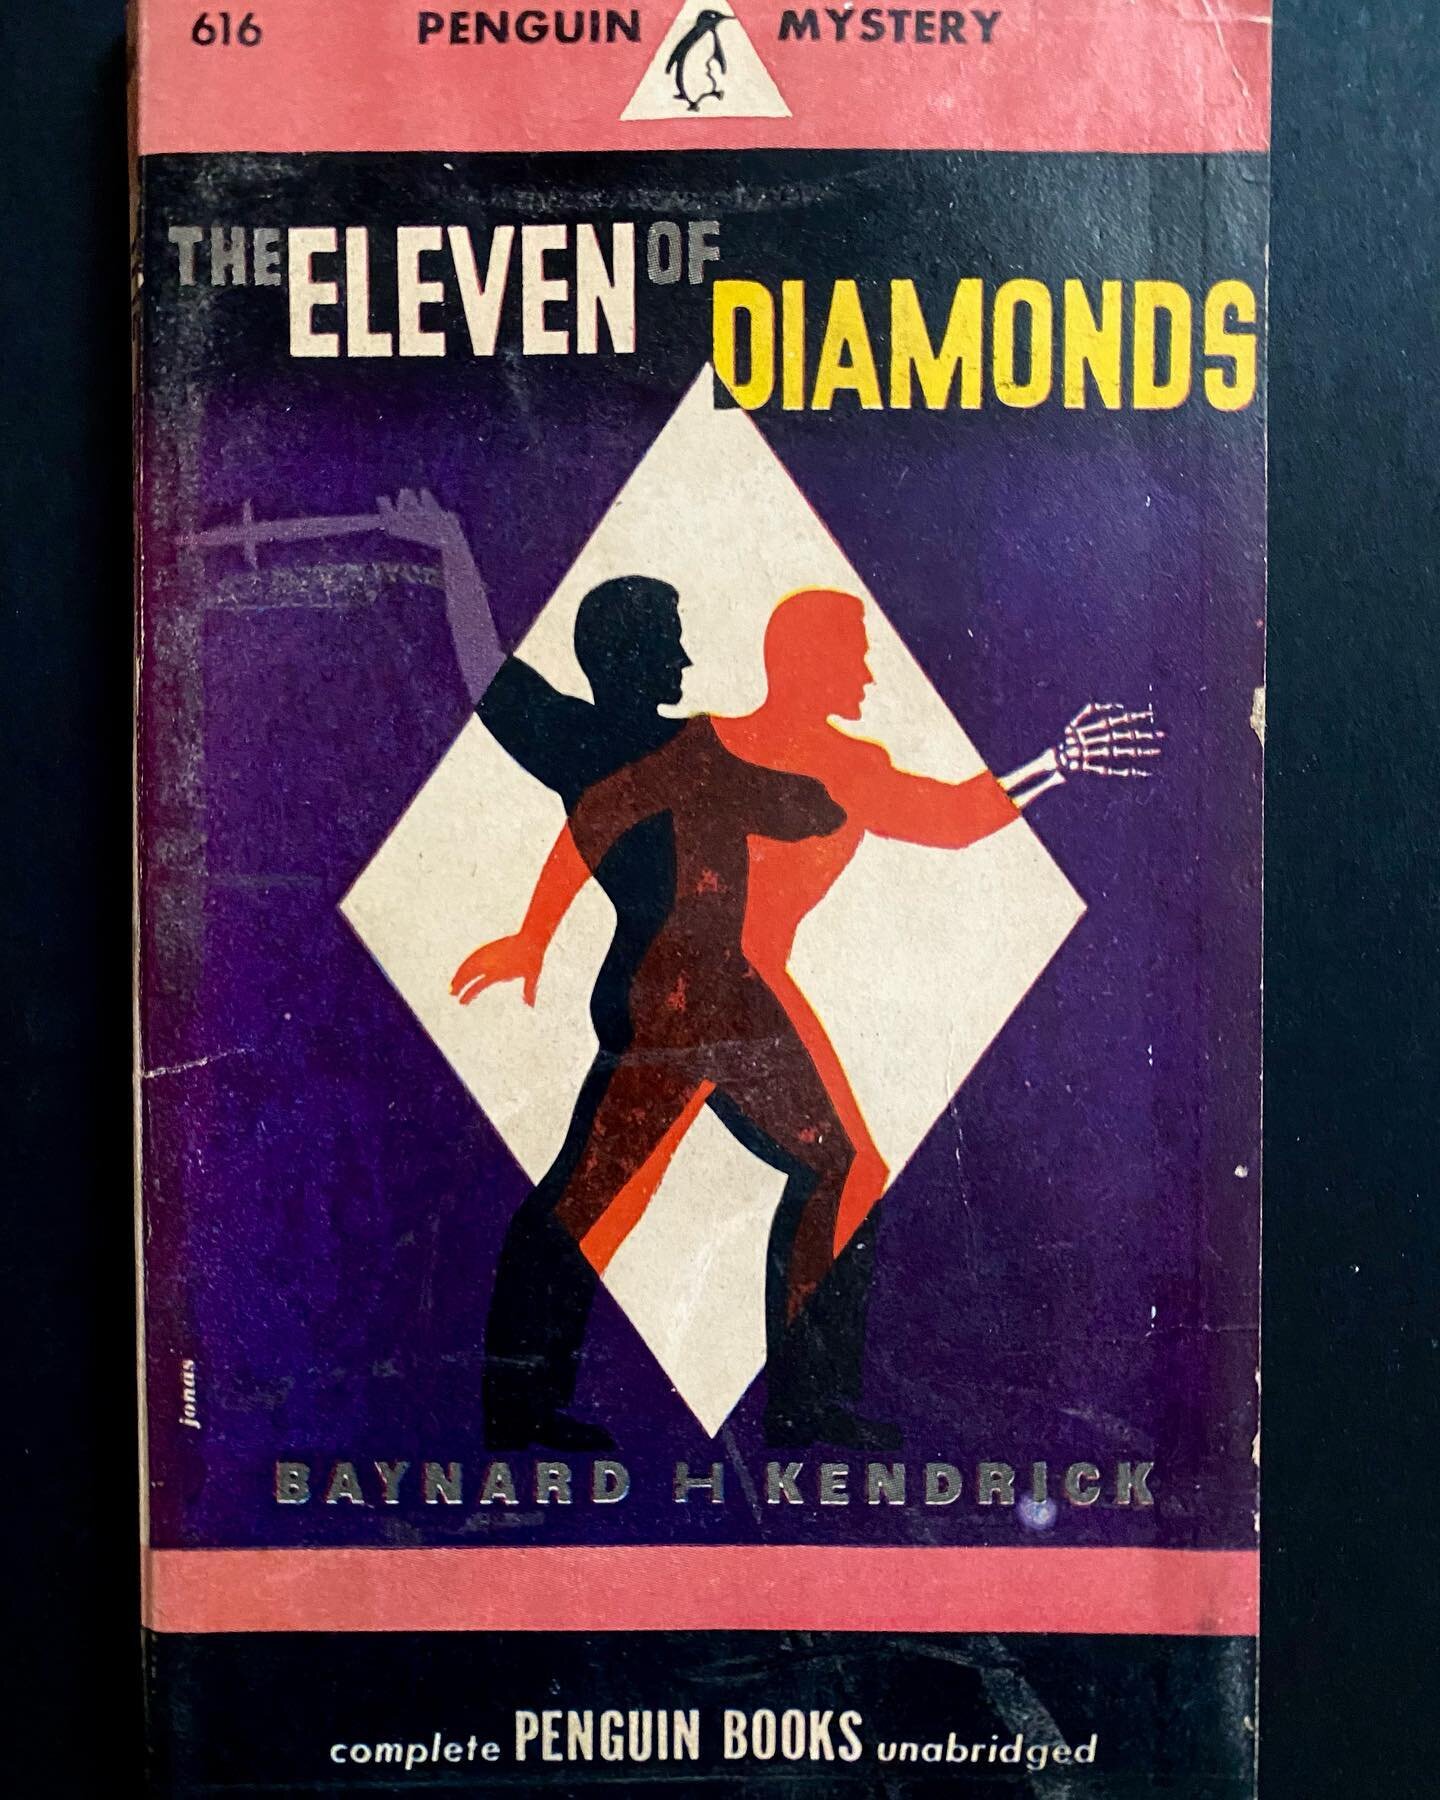 Snagged these first-edition, 1940s-era paperbacks, while on vacation in Maine, solely for the cover designs. It seems the founder of Penguin hated cover designs on books, finding them &ldquo;undignified.&rdquo; The U.S. division of Penguin had other 